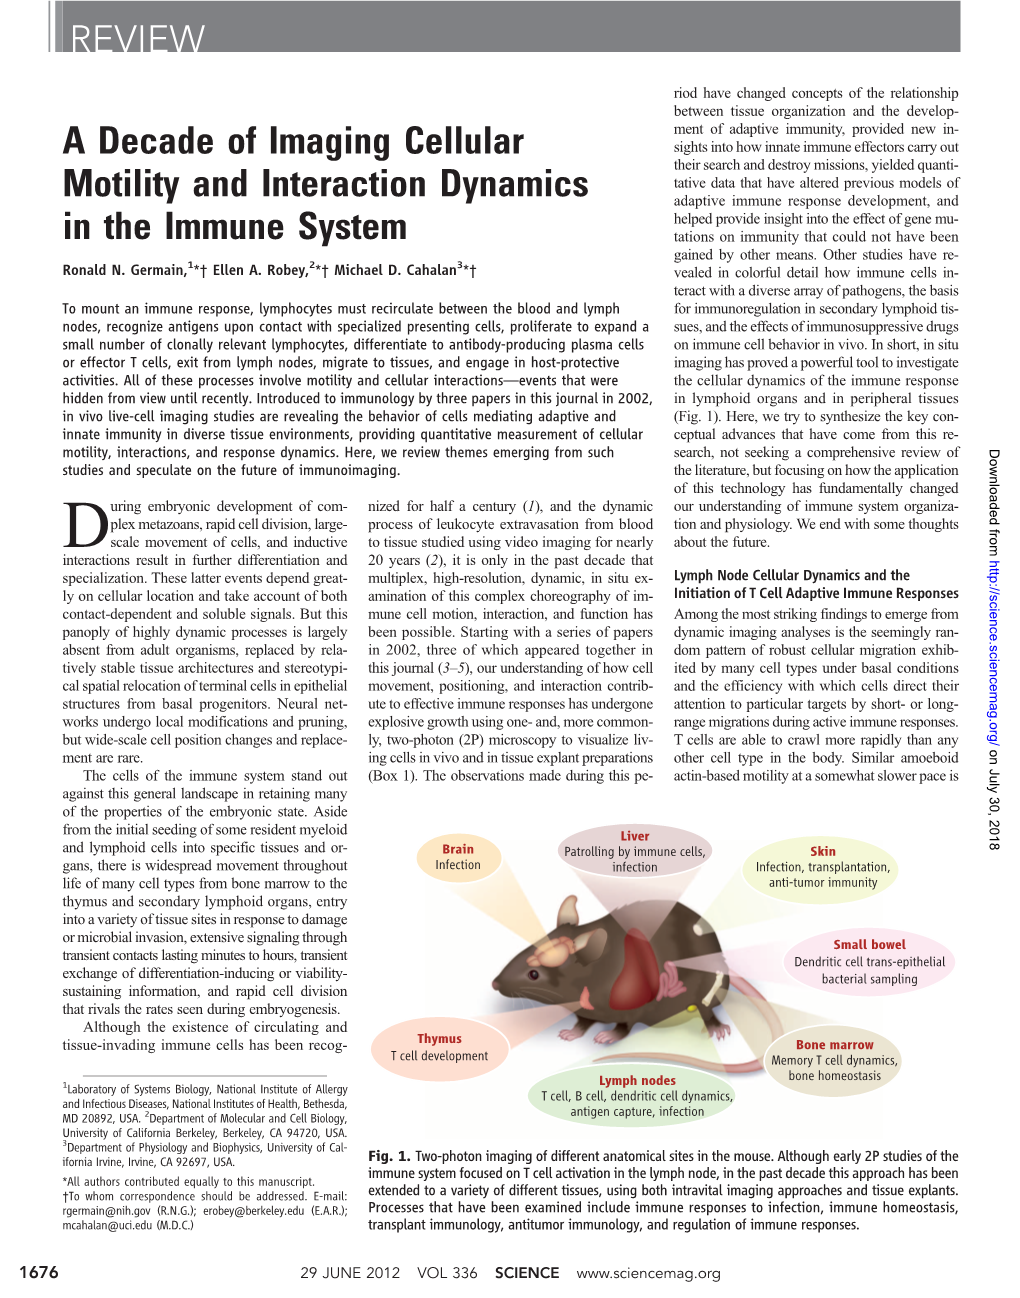 A Decade of Imaging Cellular Motility and Interaction Dynamics in the Immune System REVIEW